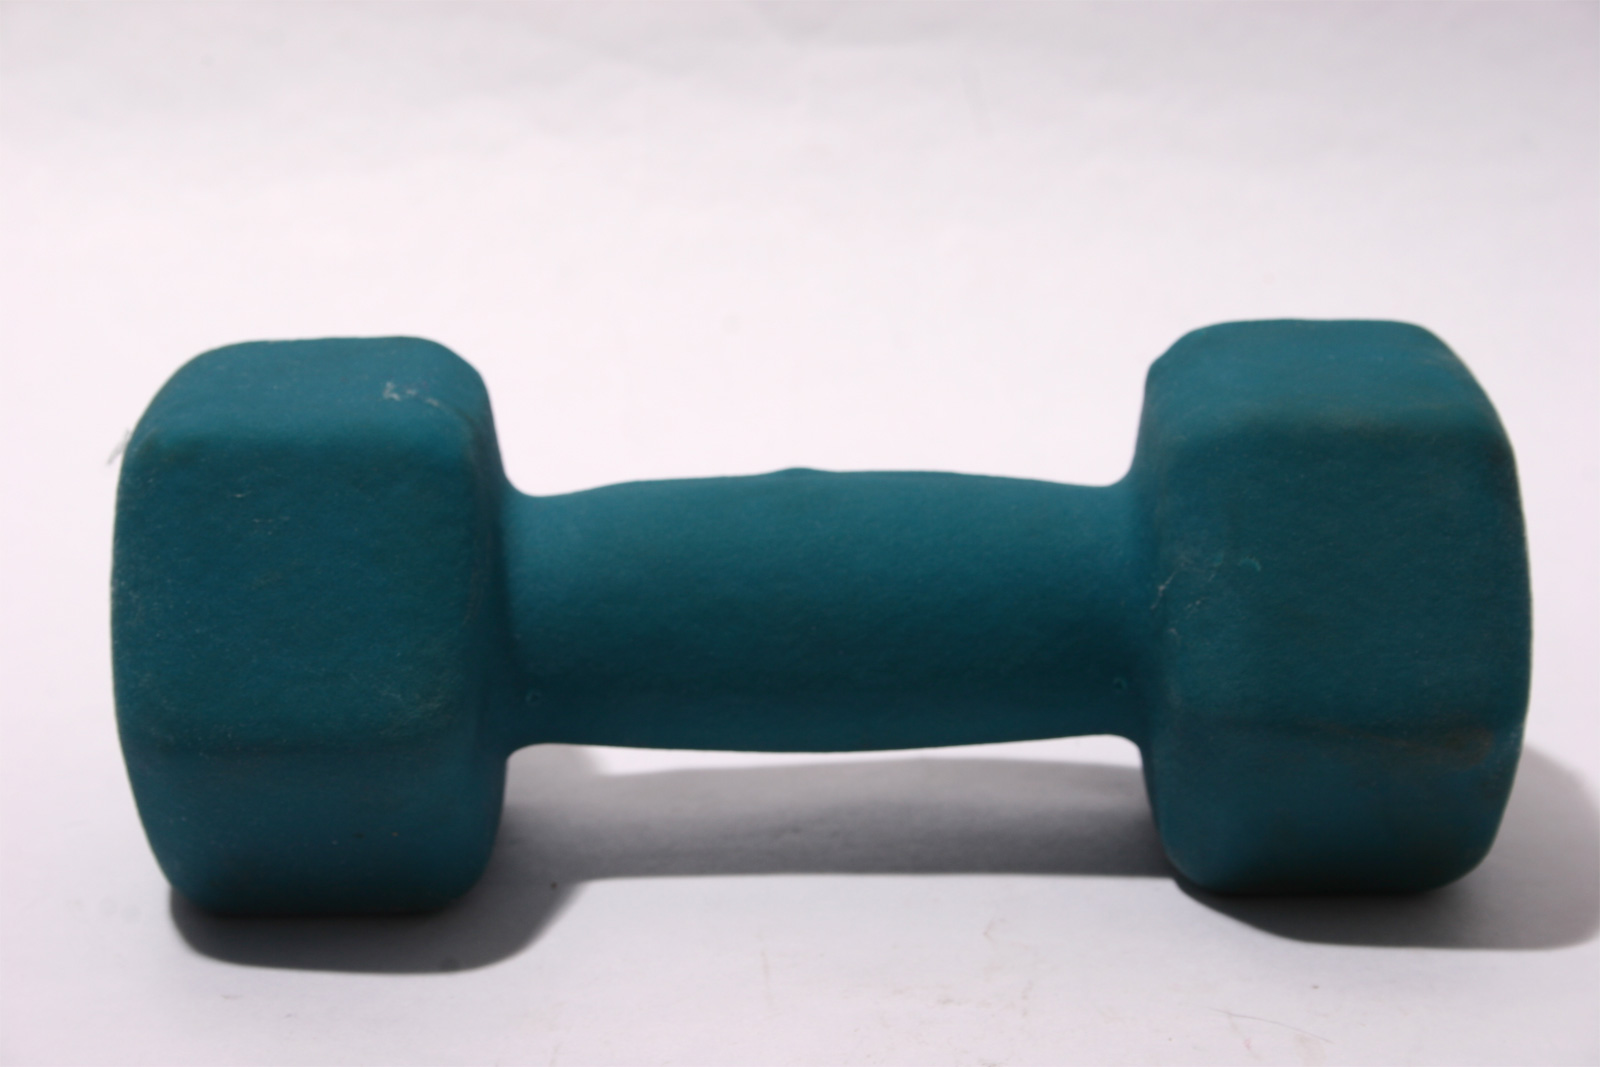 Green dumbbell weight on white background